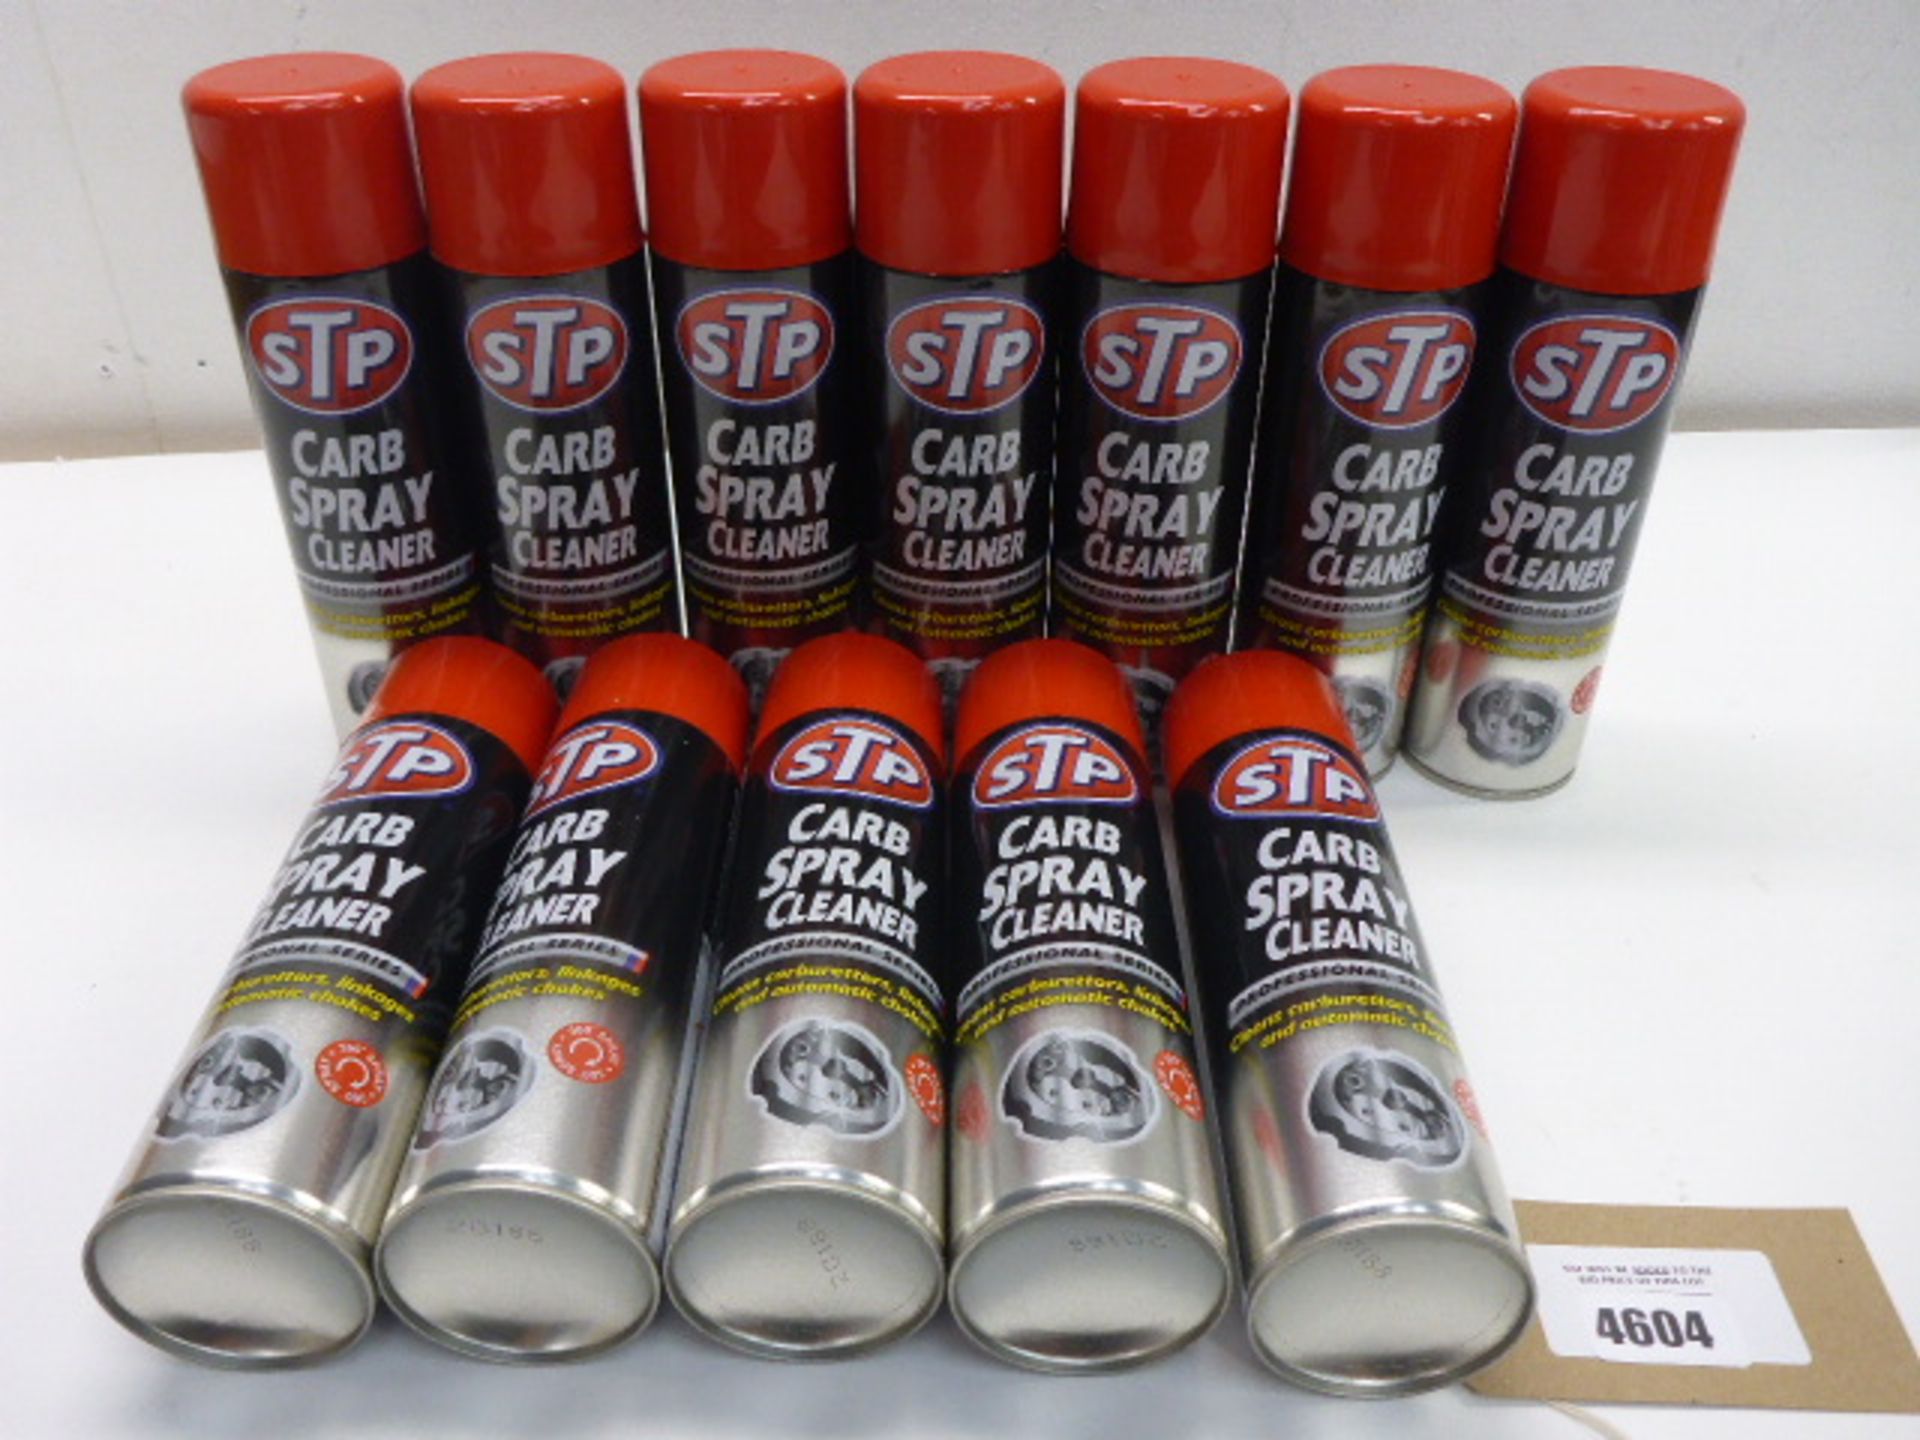 12 cans STP carb spray cleaners